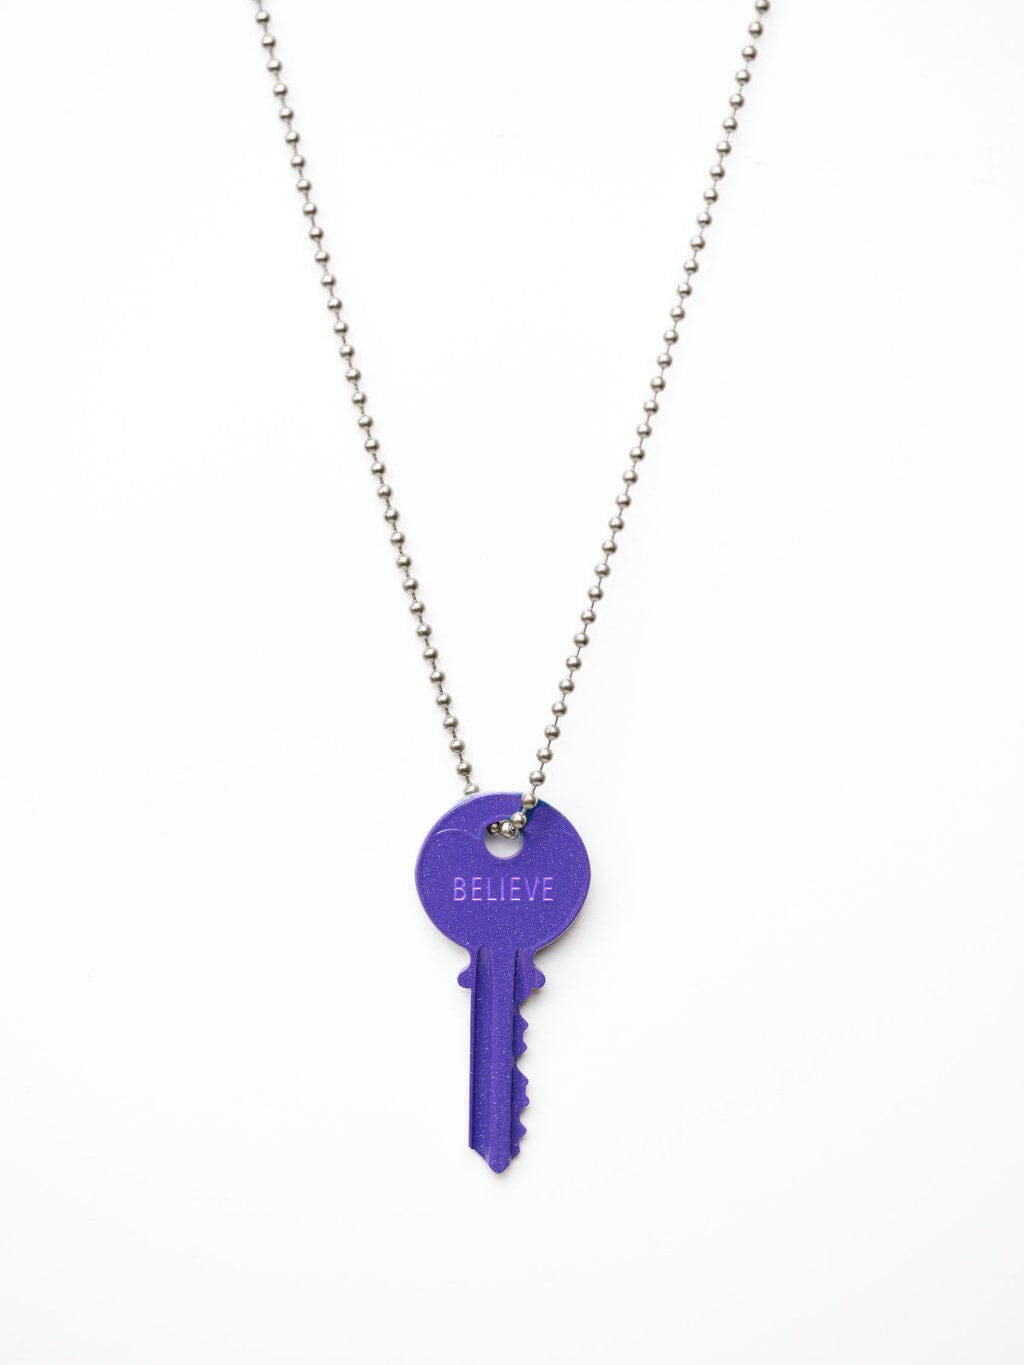 N - Dark Purple Classic Ball Chain Key Necklace Necklaces The Giving Keys Silver 